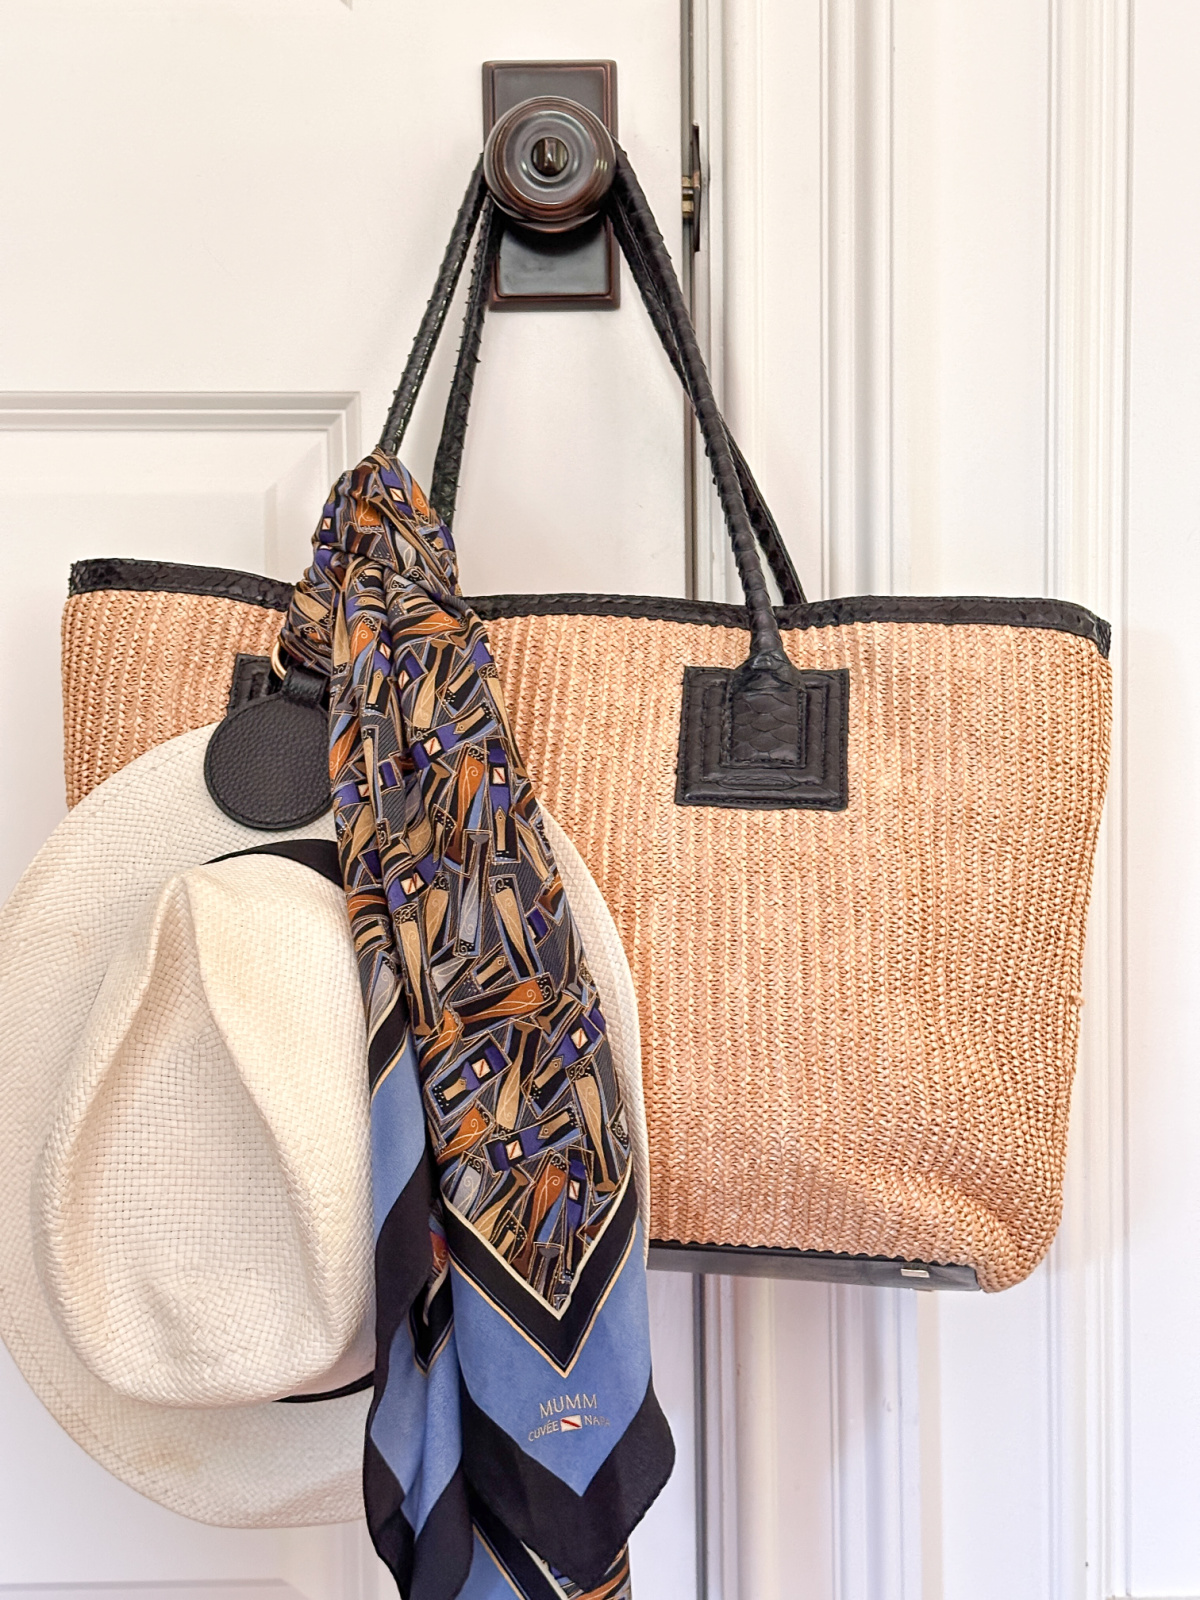 Straw tote with leather trim hanging on door knob along with hat and scarf.